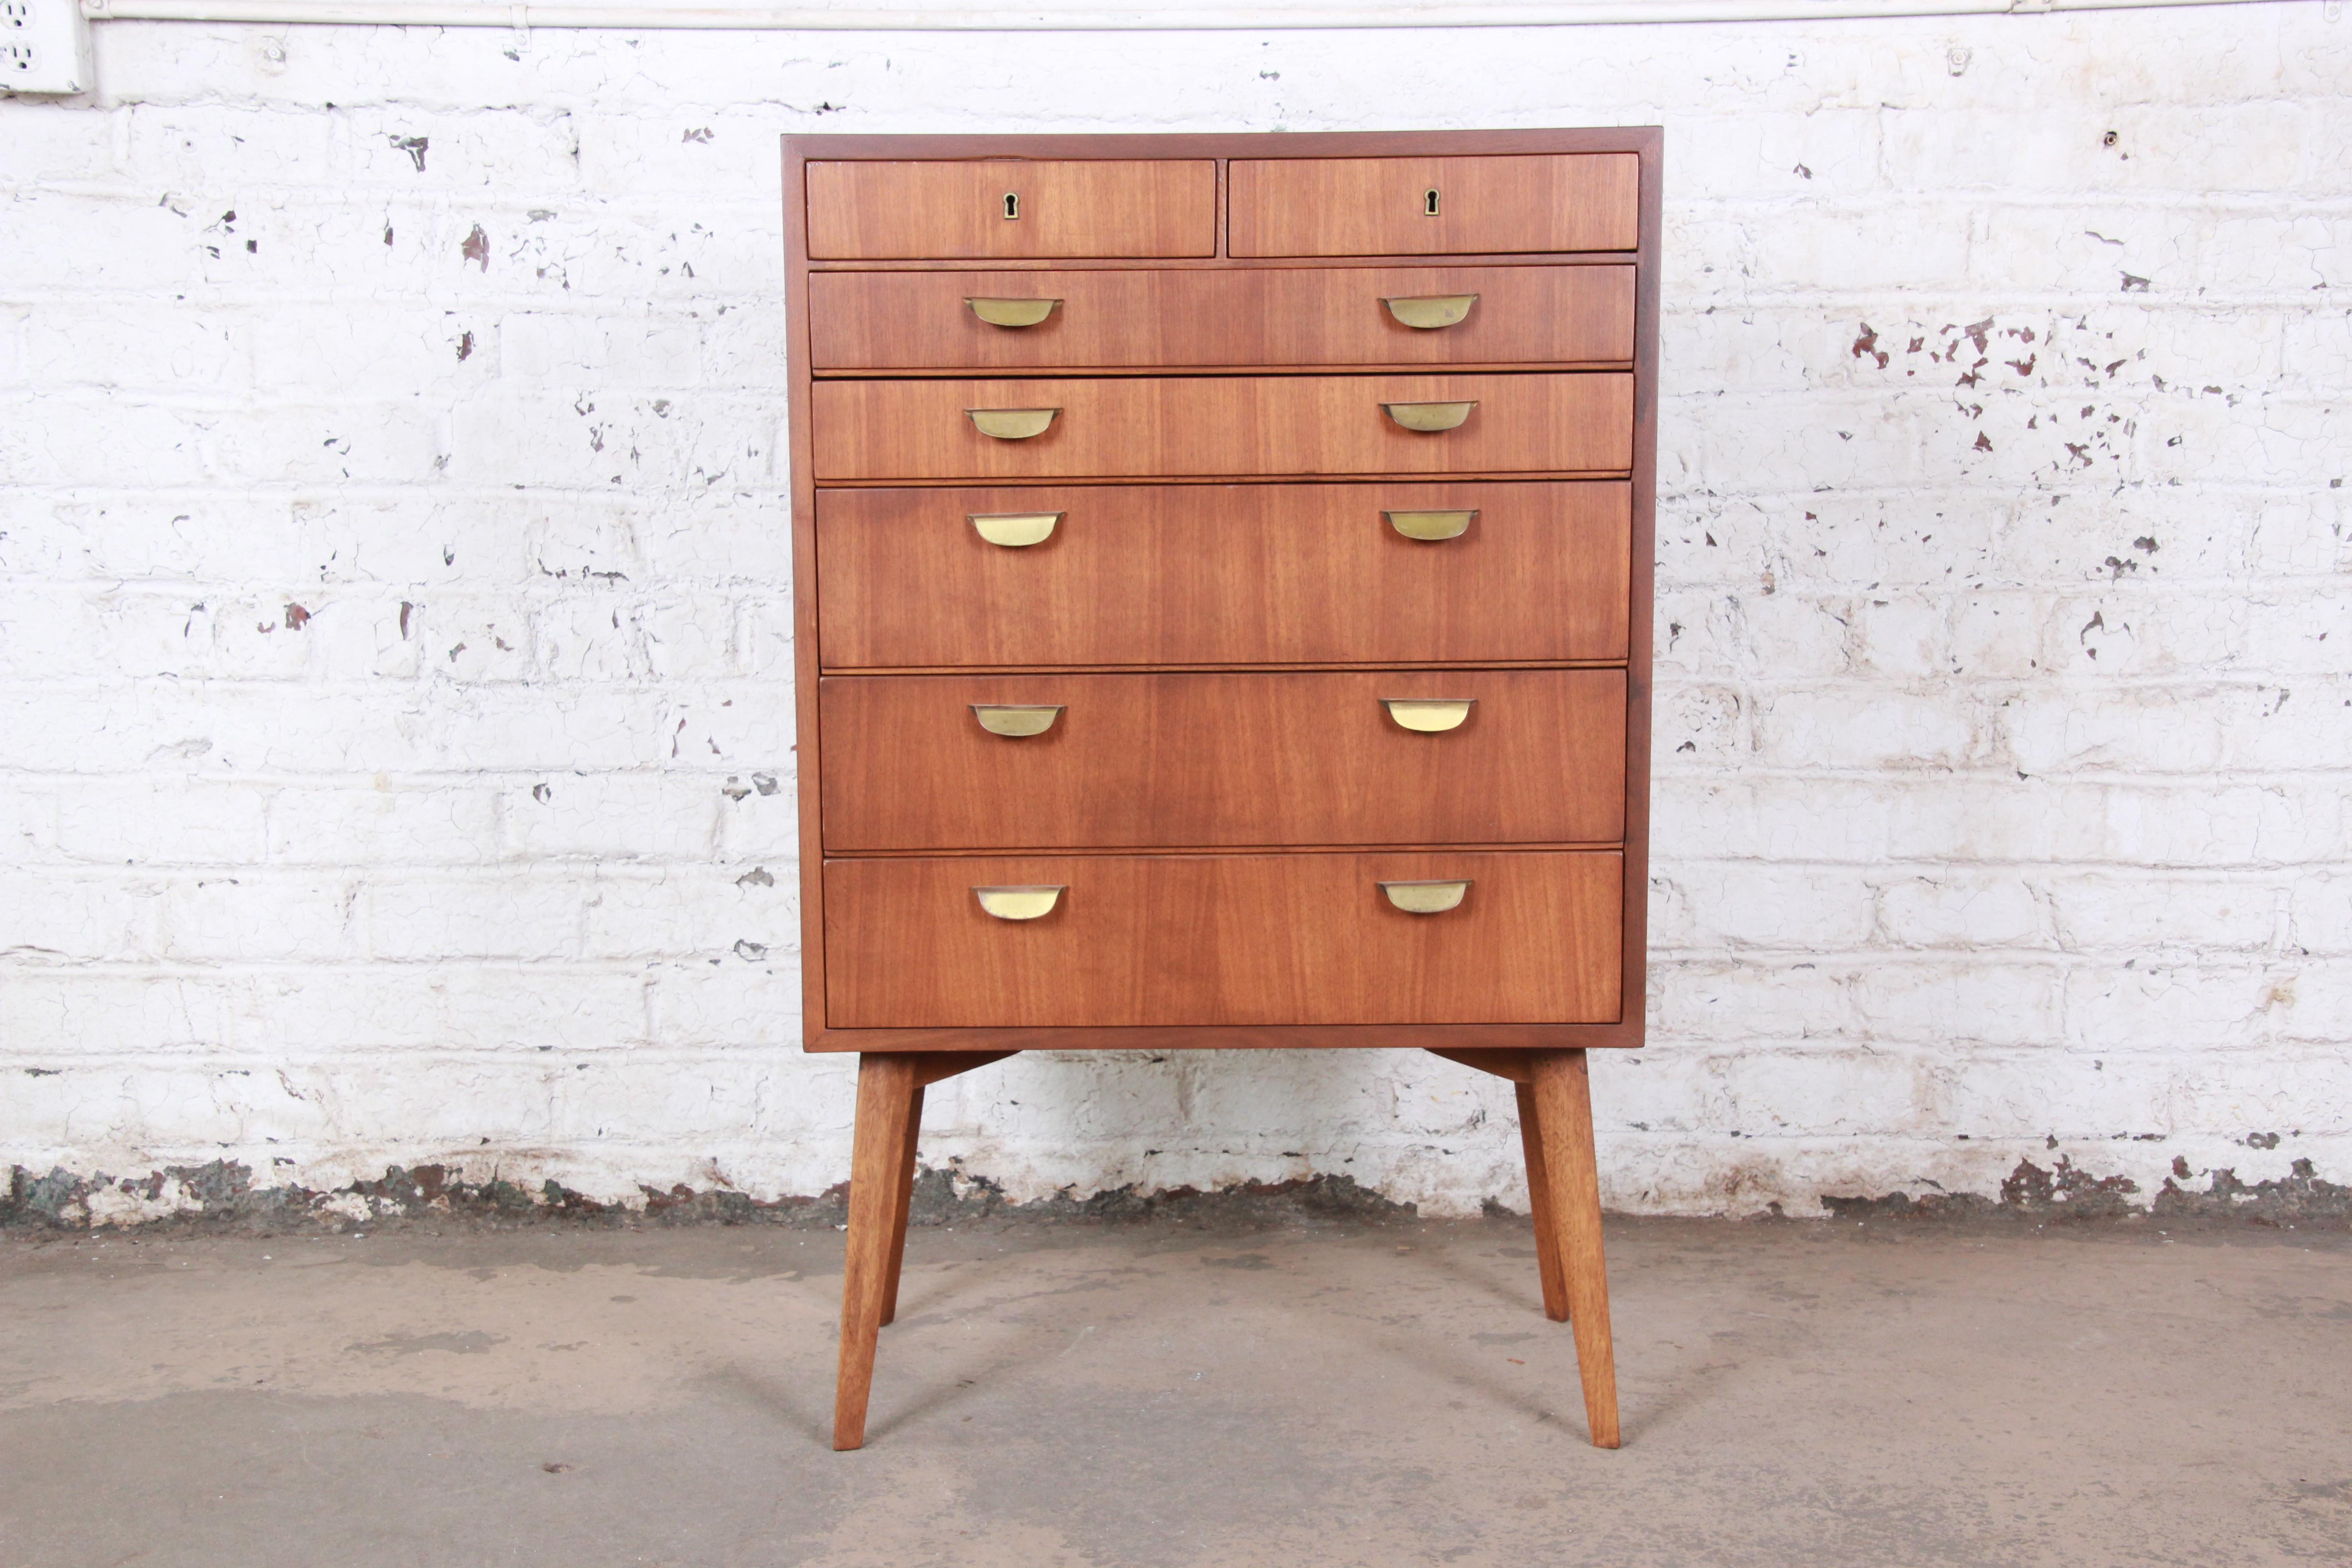 A rare and exceptional Mid-Century Modern bachelor chest designed in Germany by Helmut Magg for WK Möbel. The 7-drawer highboy dresser features clean, sleek midcentury lines with Minimalist design and a beautiful walnut wood grain. It is well